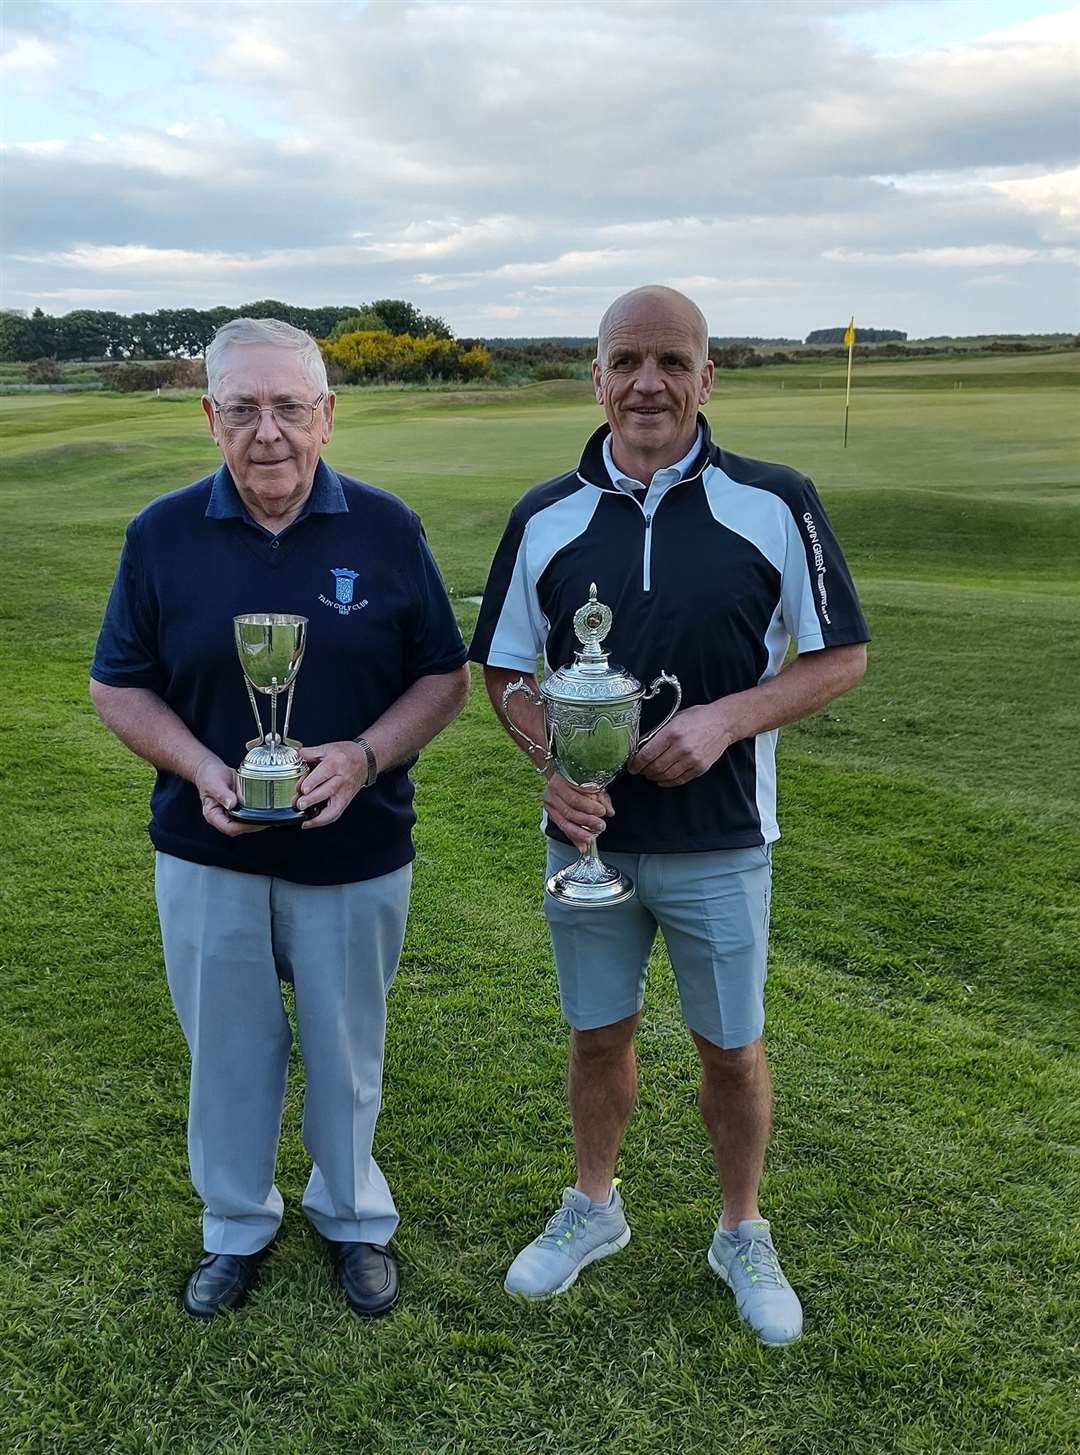 John Cameron and Billy Ferries with their trophies after winning their respective sections at the Tain championships.